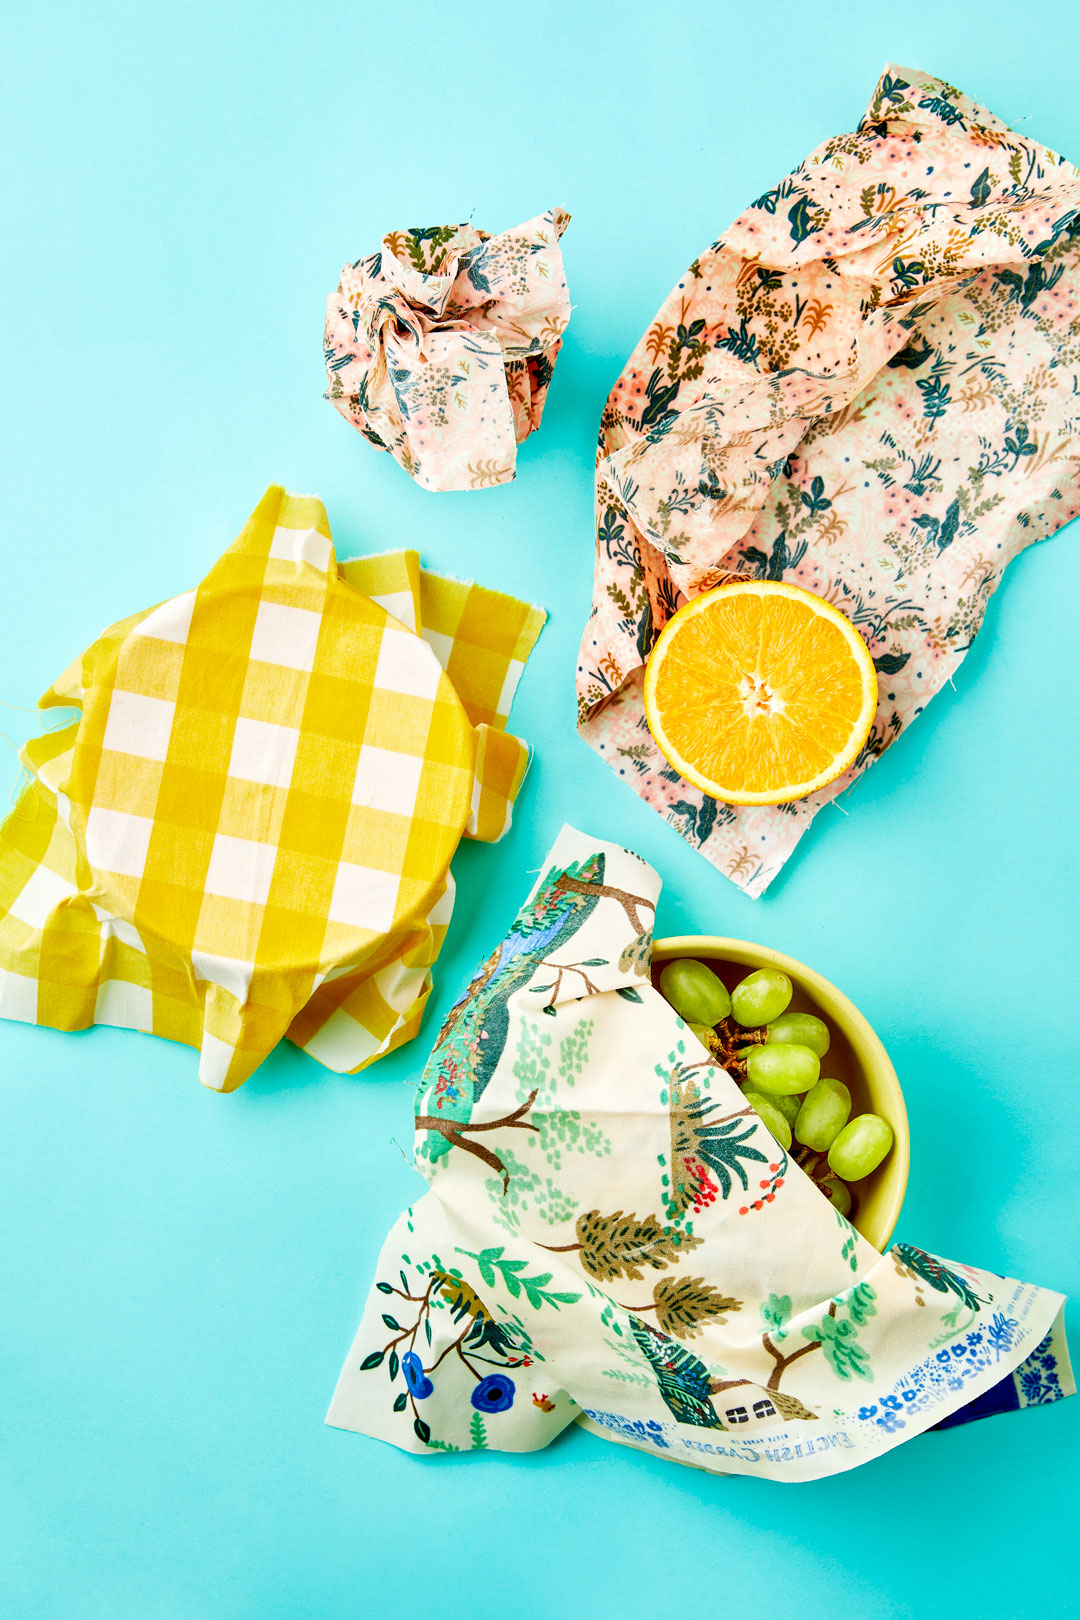 How to make your own beeswax wraps: bowl, grapes, and an orange wrapped in DIY beeswax wraps